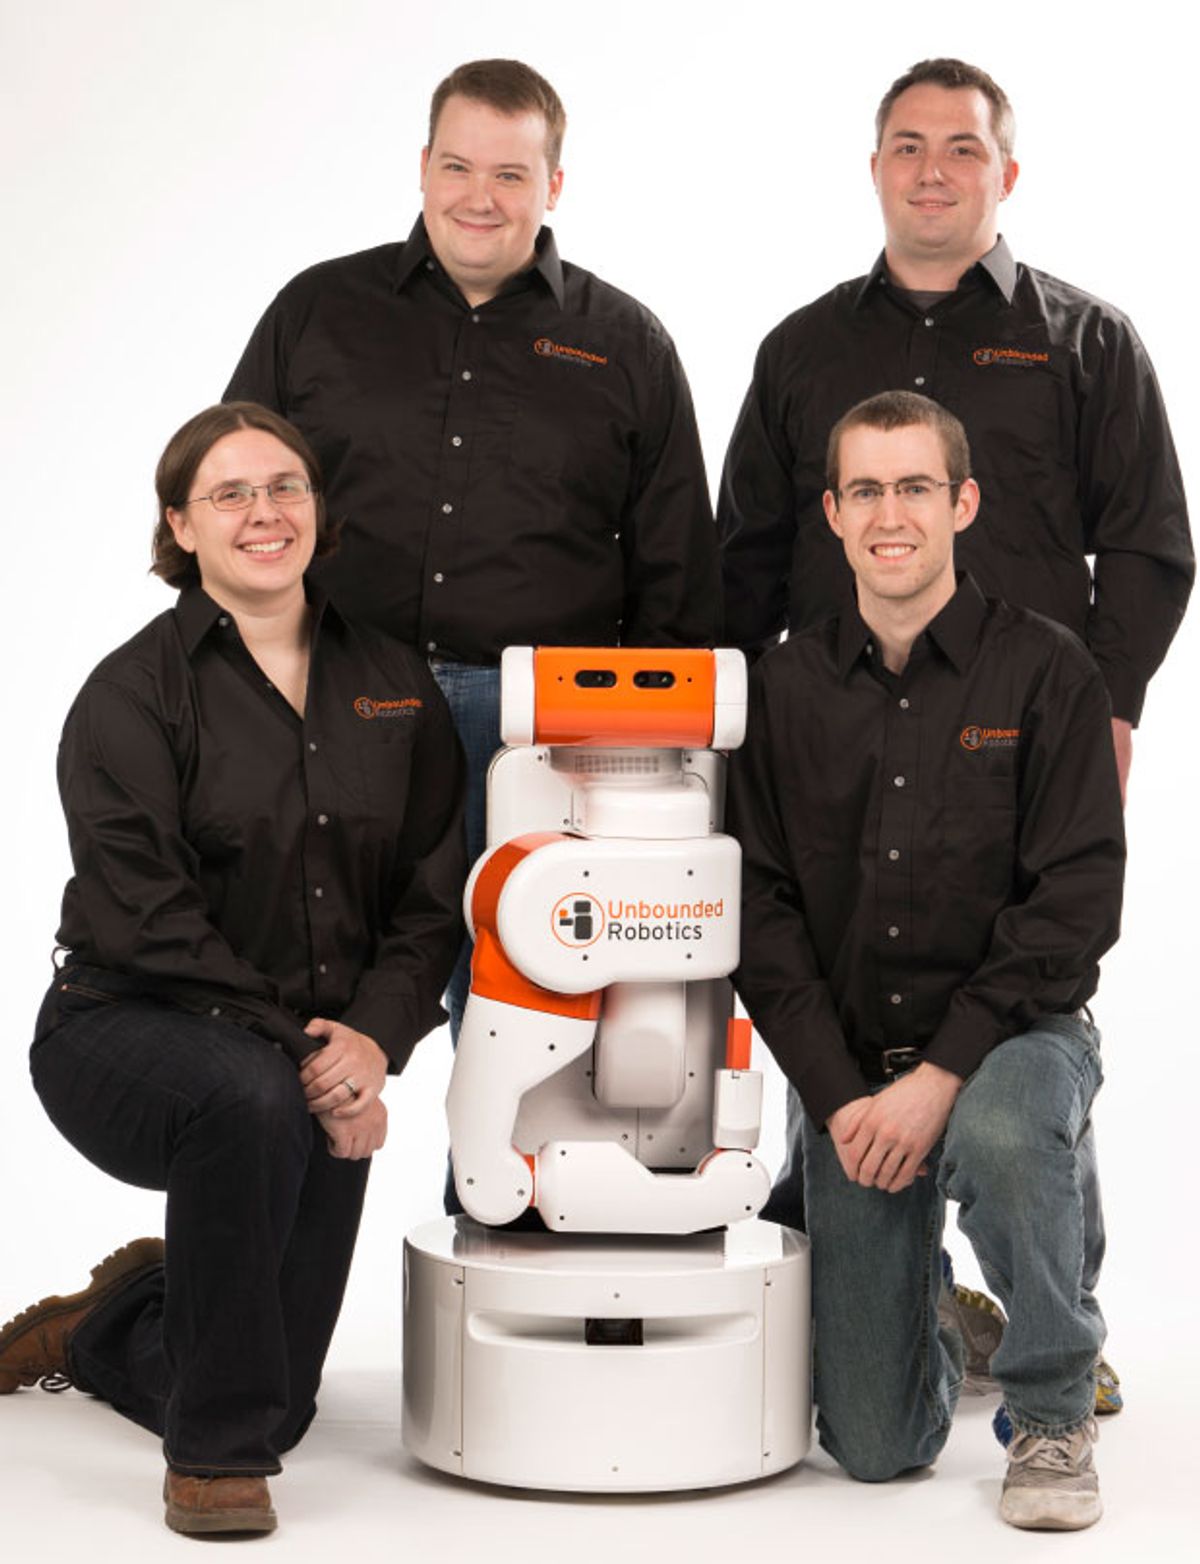 Interview: Unbounded Robotics on Why UBR-1 Will Change Everything